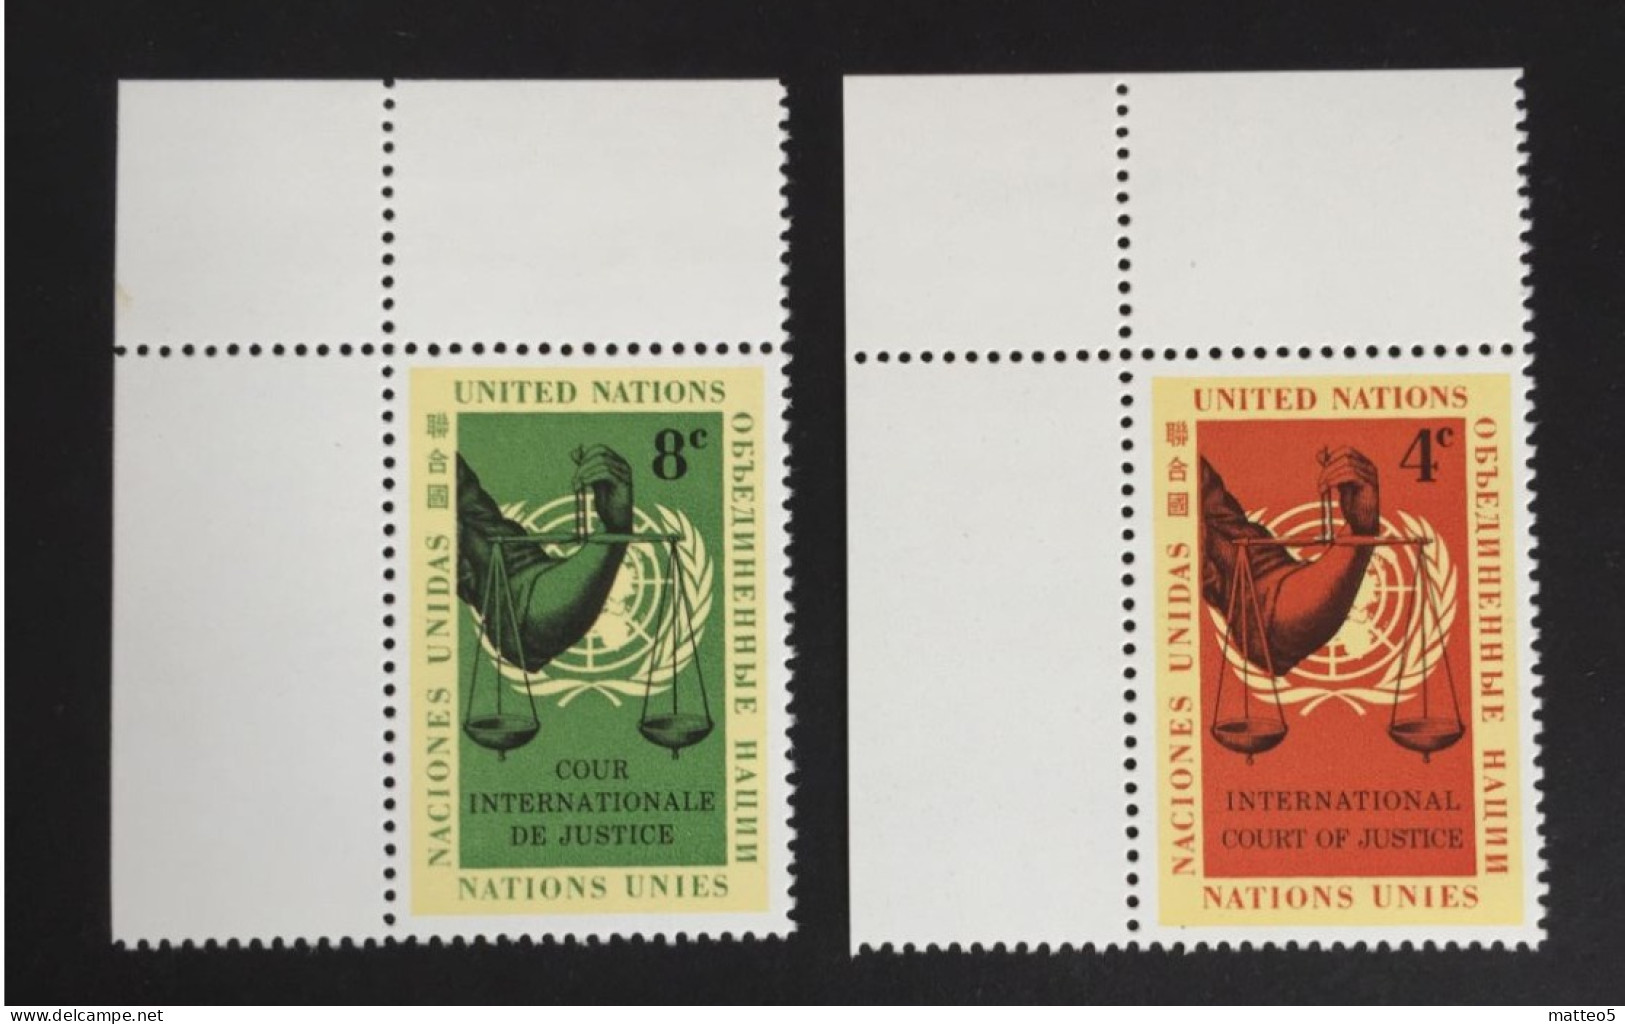 1961 - United Nations UNO UN - International Court Of Justice - Pair Of Scales - 2 Stamps Unused - Neufs